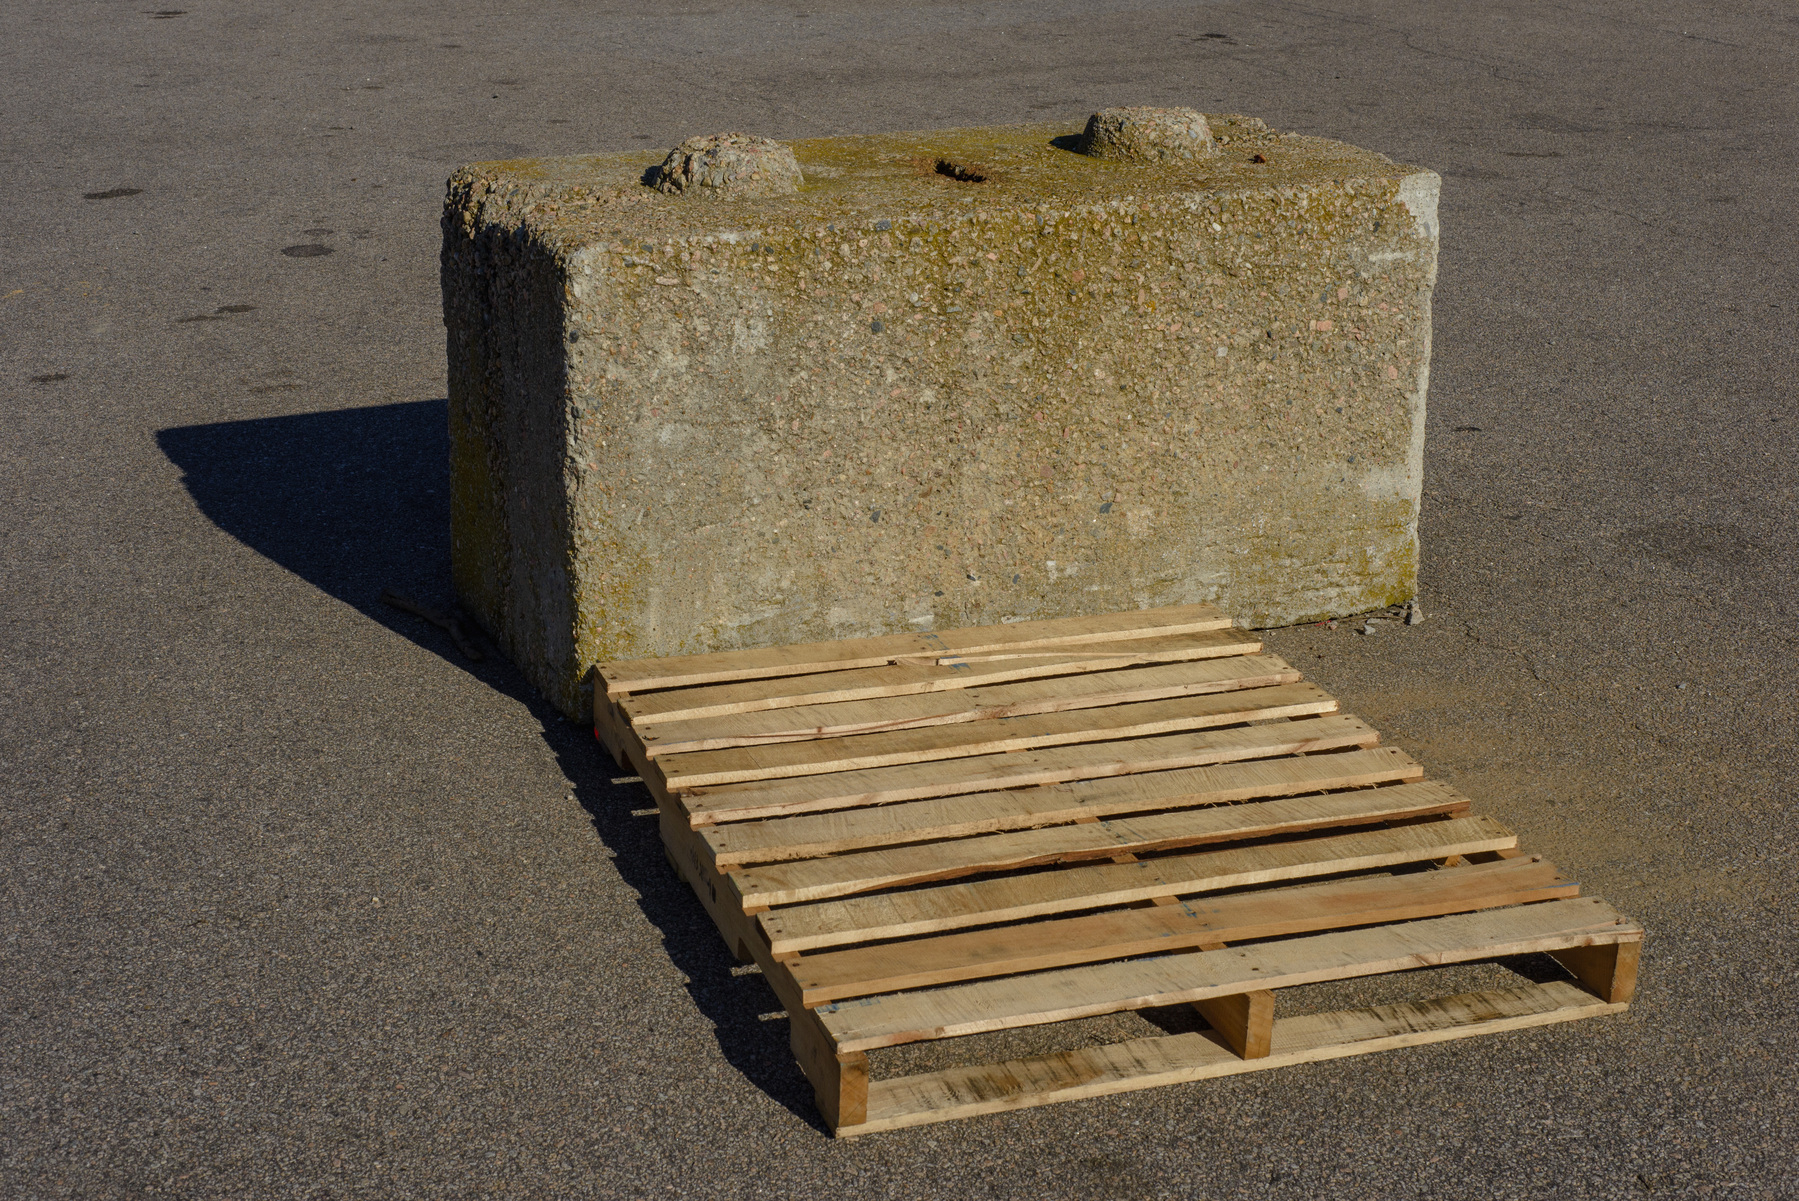 Concrete barrier with wooden pallet on the ground in front of it, on an asphalt paving surface.